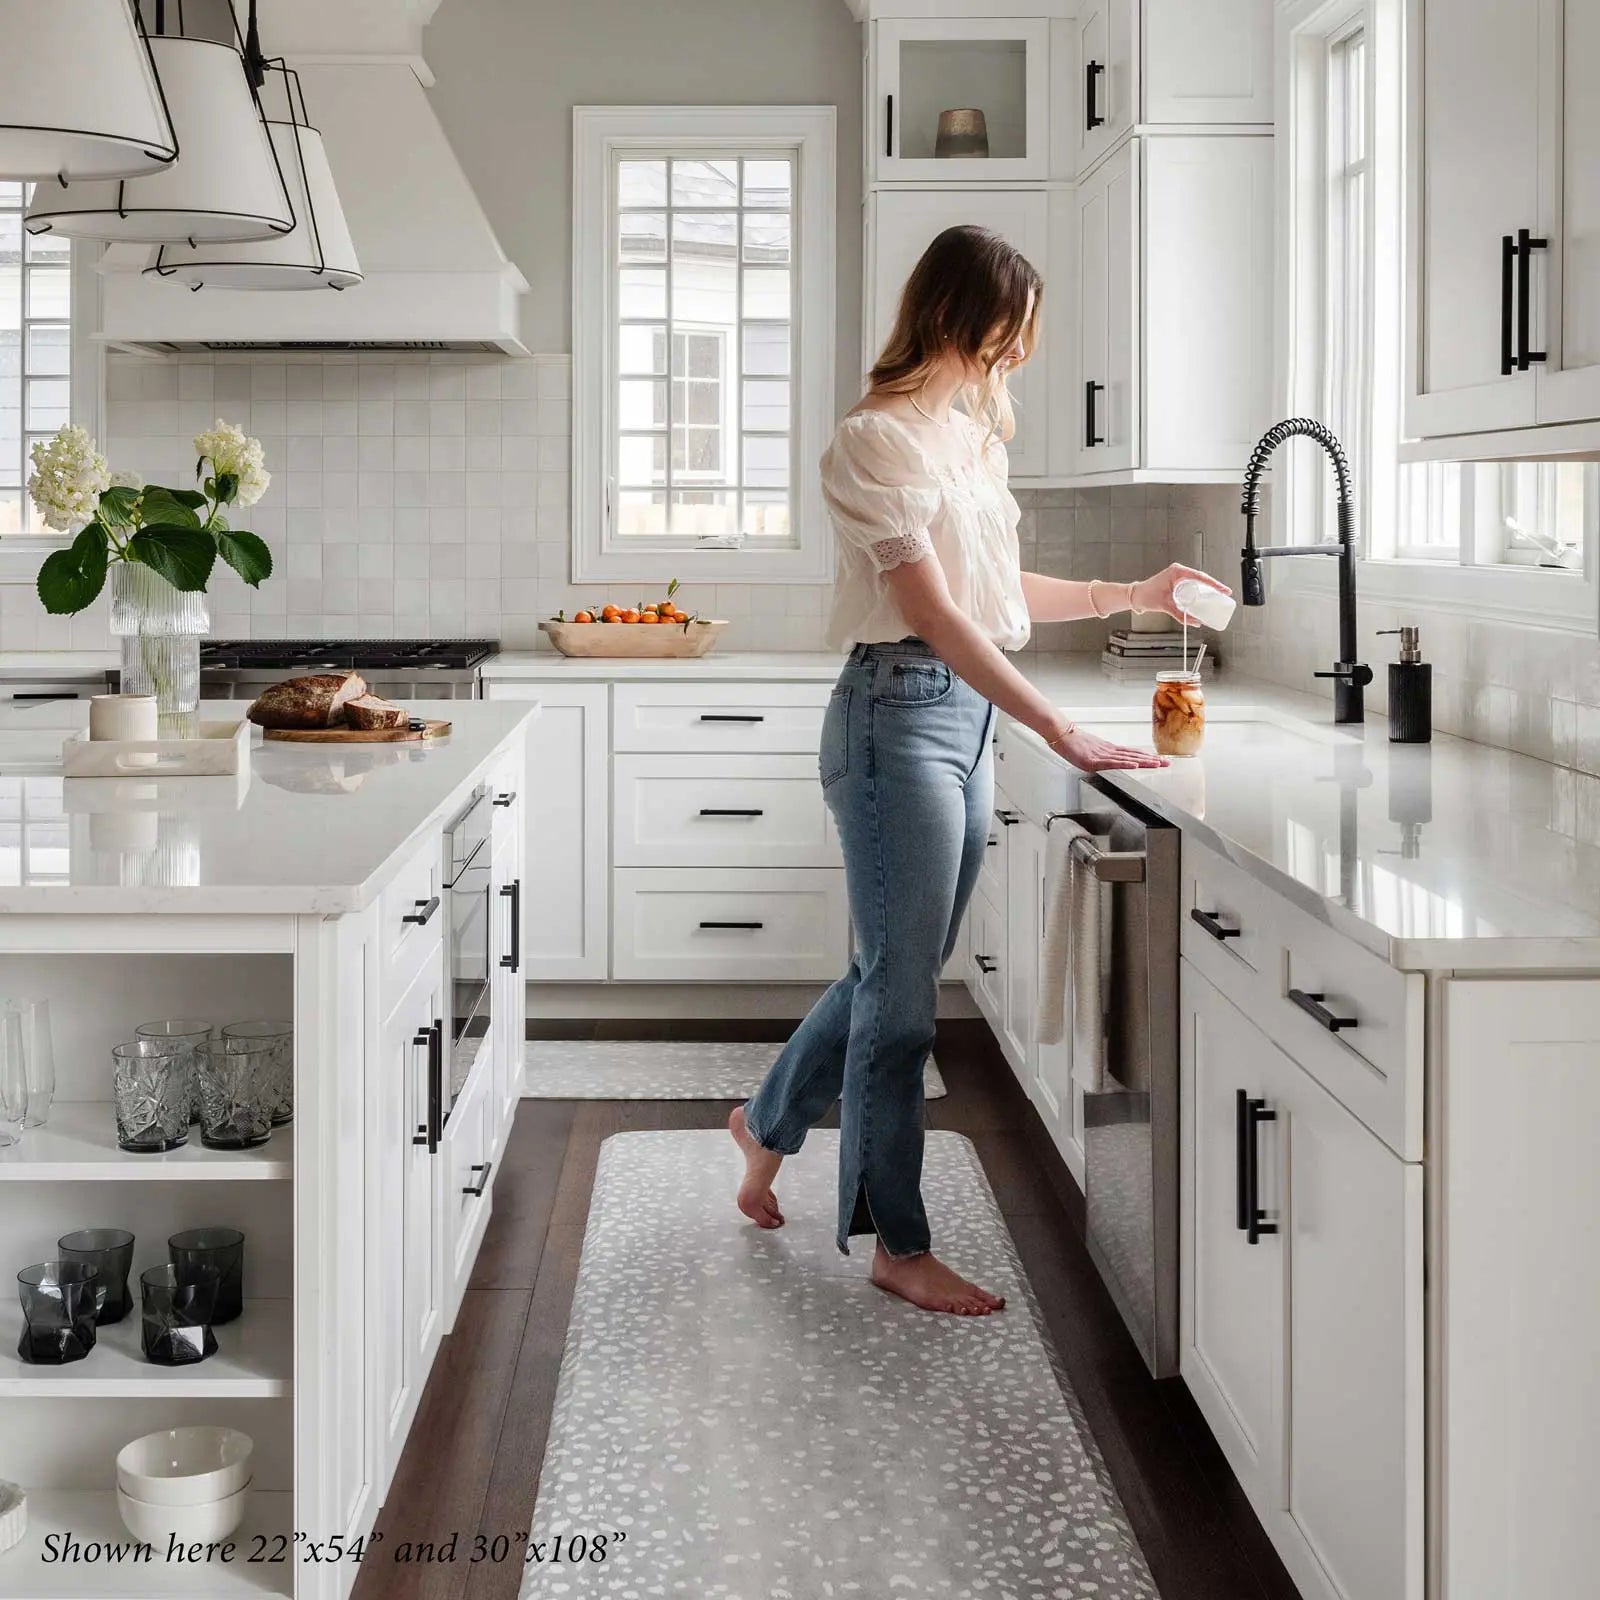 Fawn silver gray animal print kitchen mat shown in sizes 22x54 and 30x108 with woman standing on size 30x108 making a smoothie